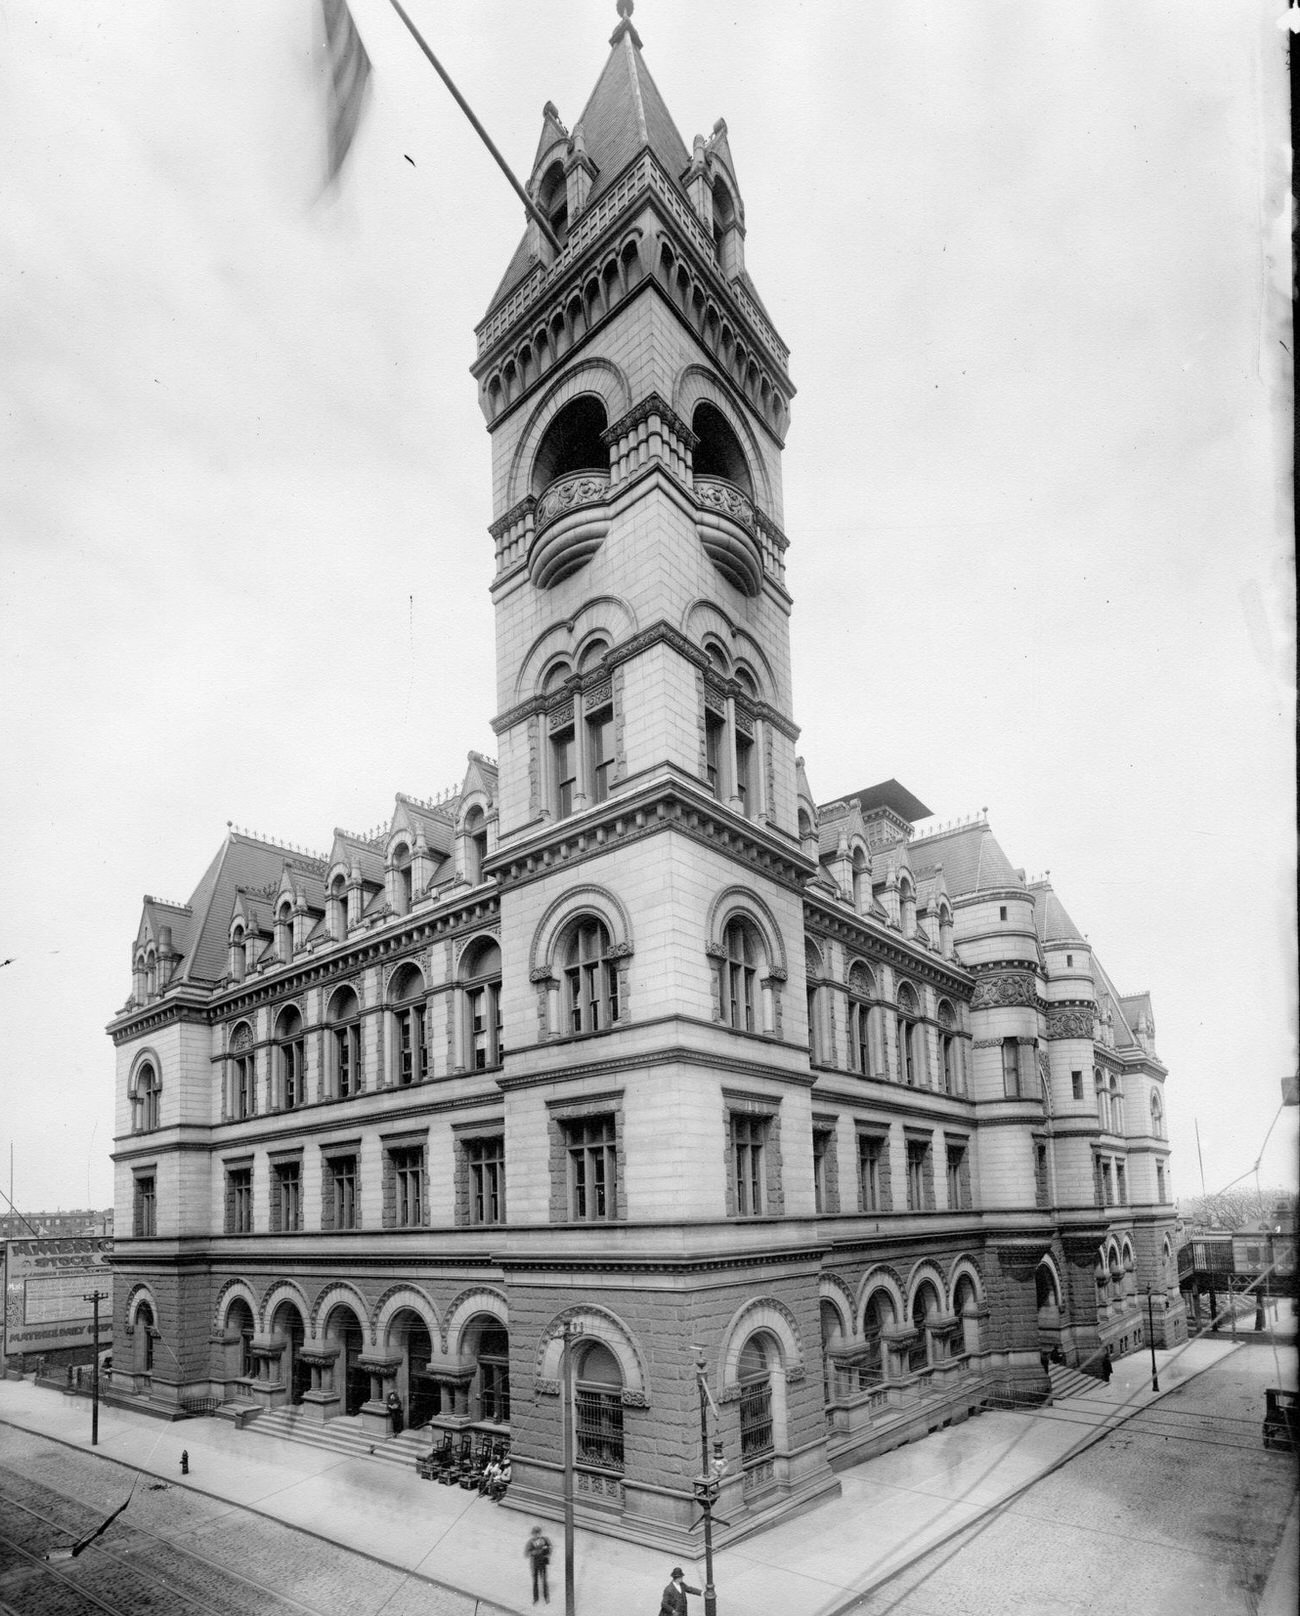 United States Post Office Main Building In Brooklyn Heights, Brooklyn, 1895